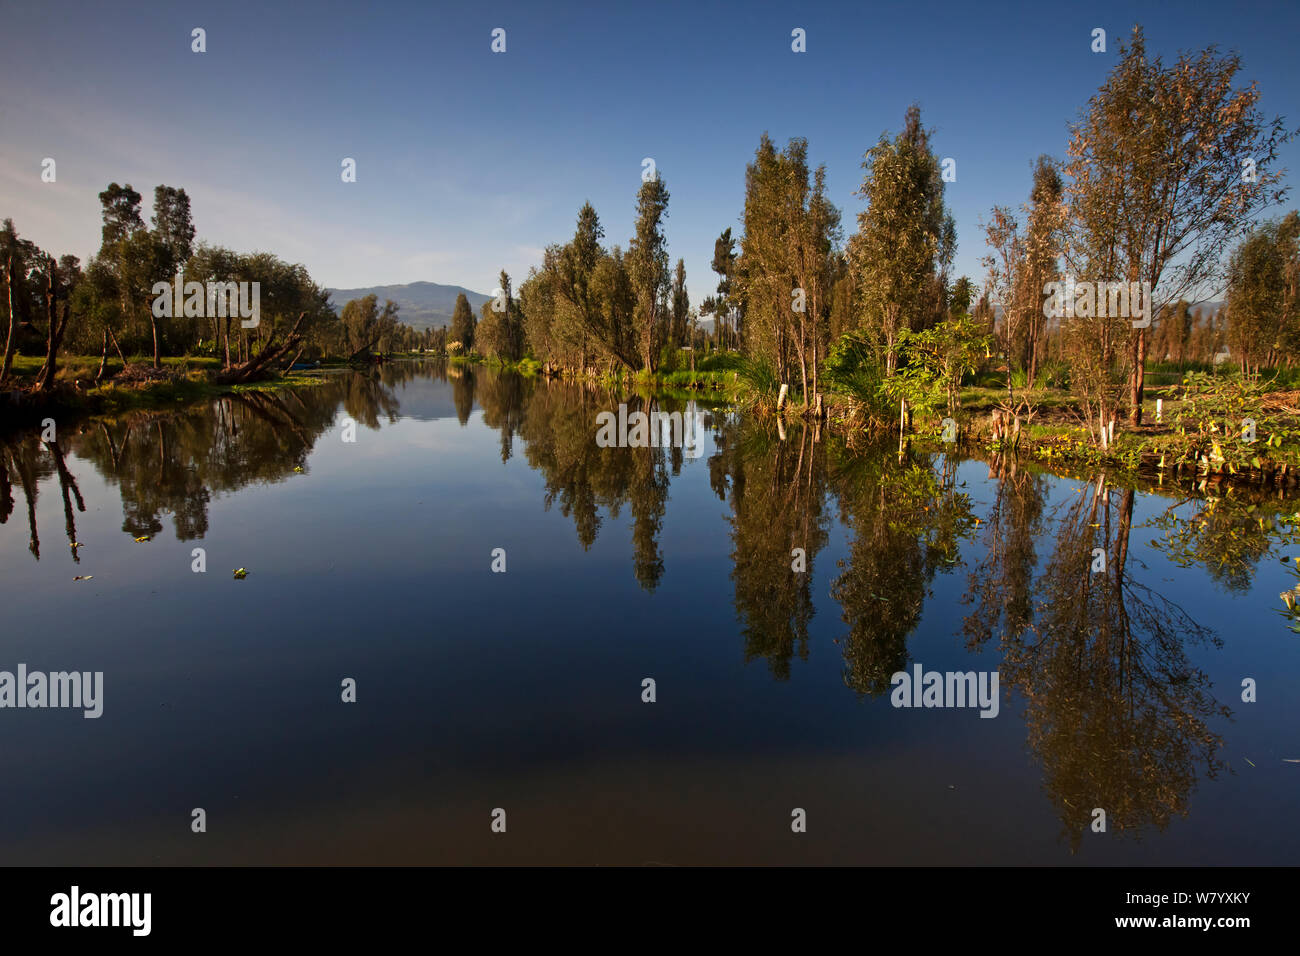 Canal between chinampas, a wetland agricultural system. Xochimilco wetlands, Mexico City, September Stock Photo